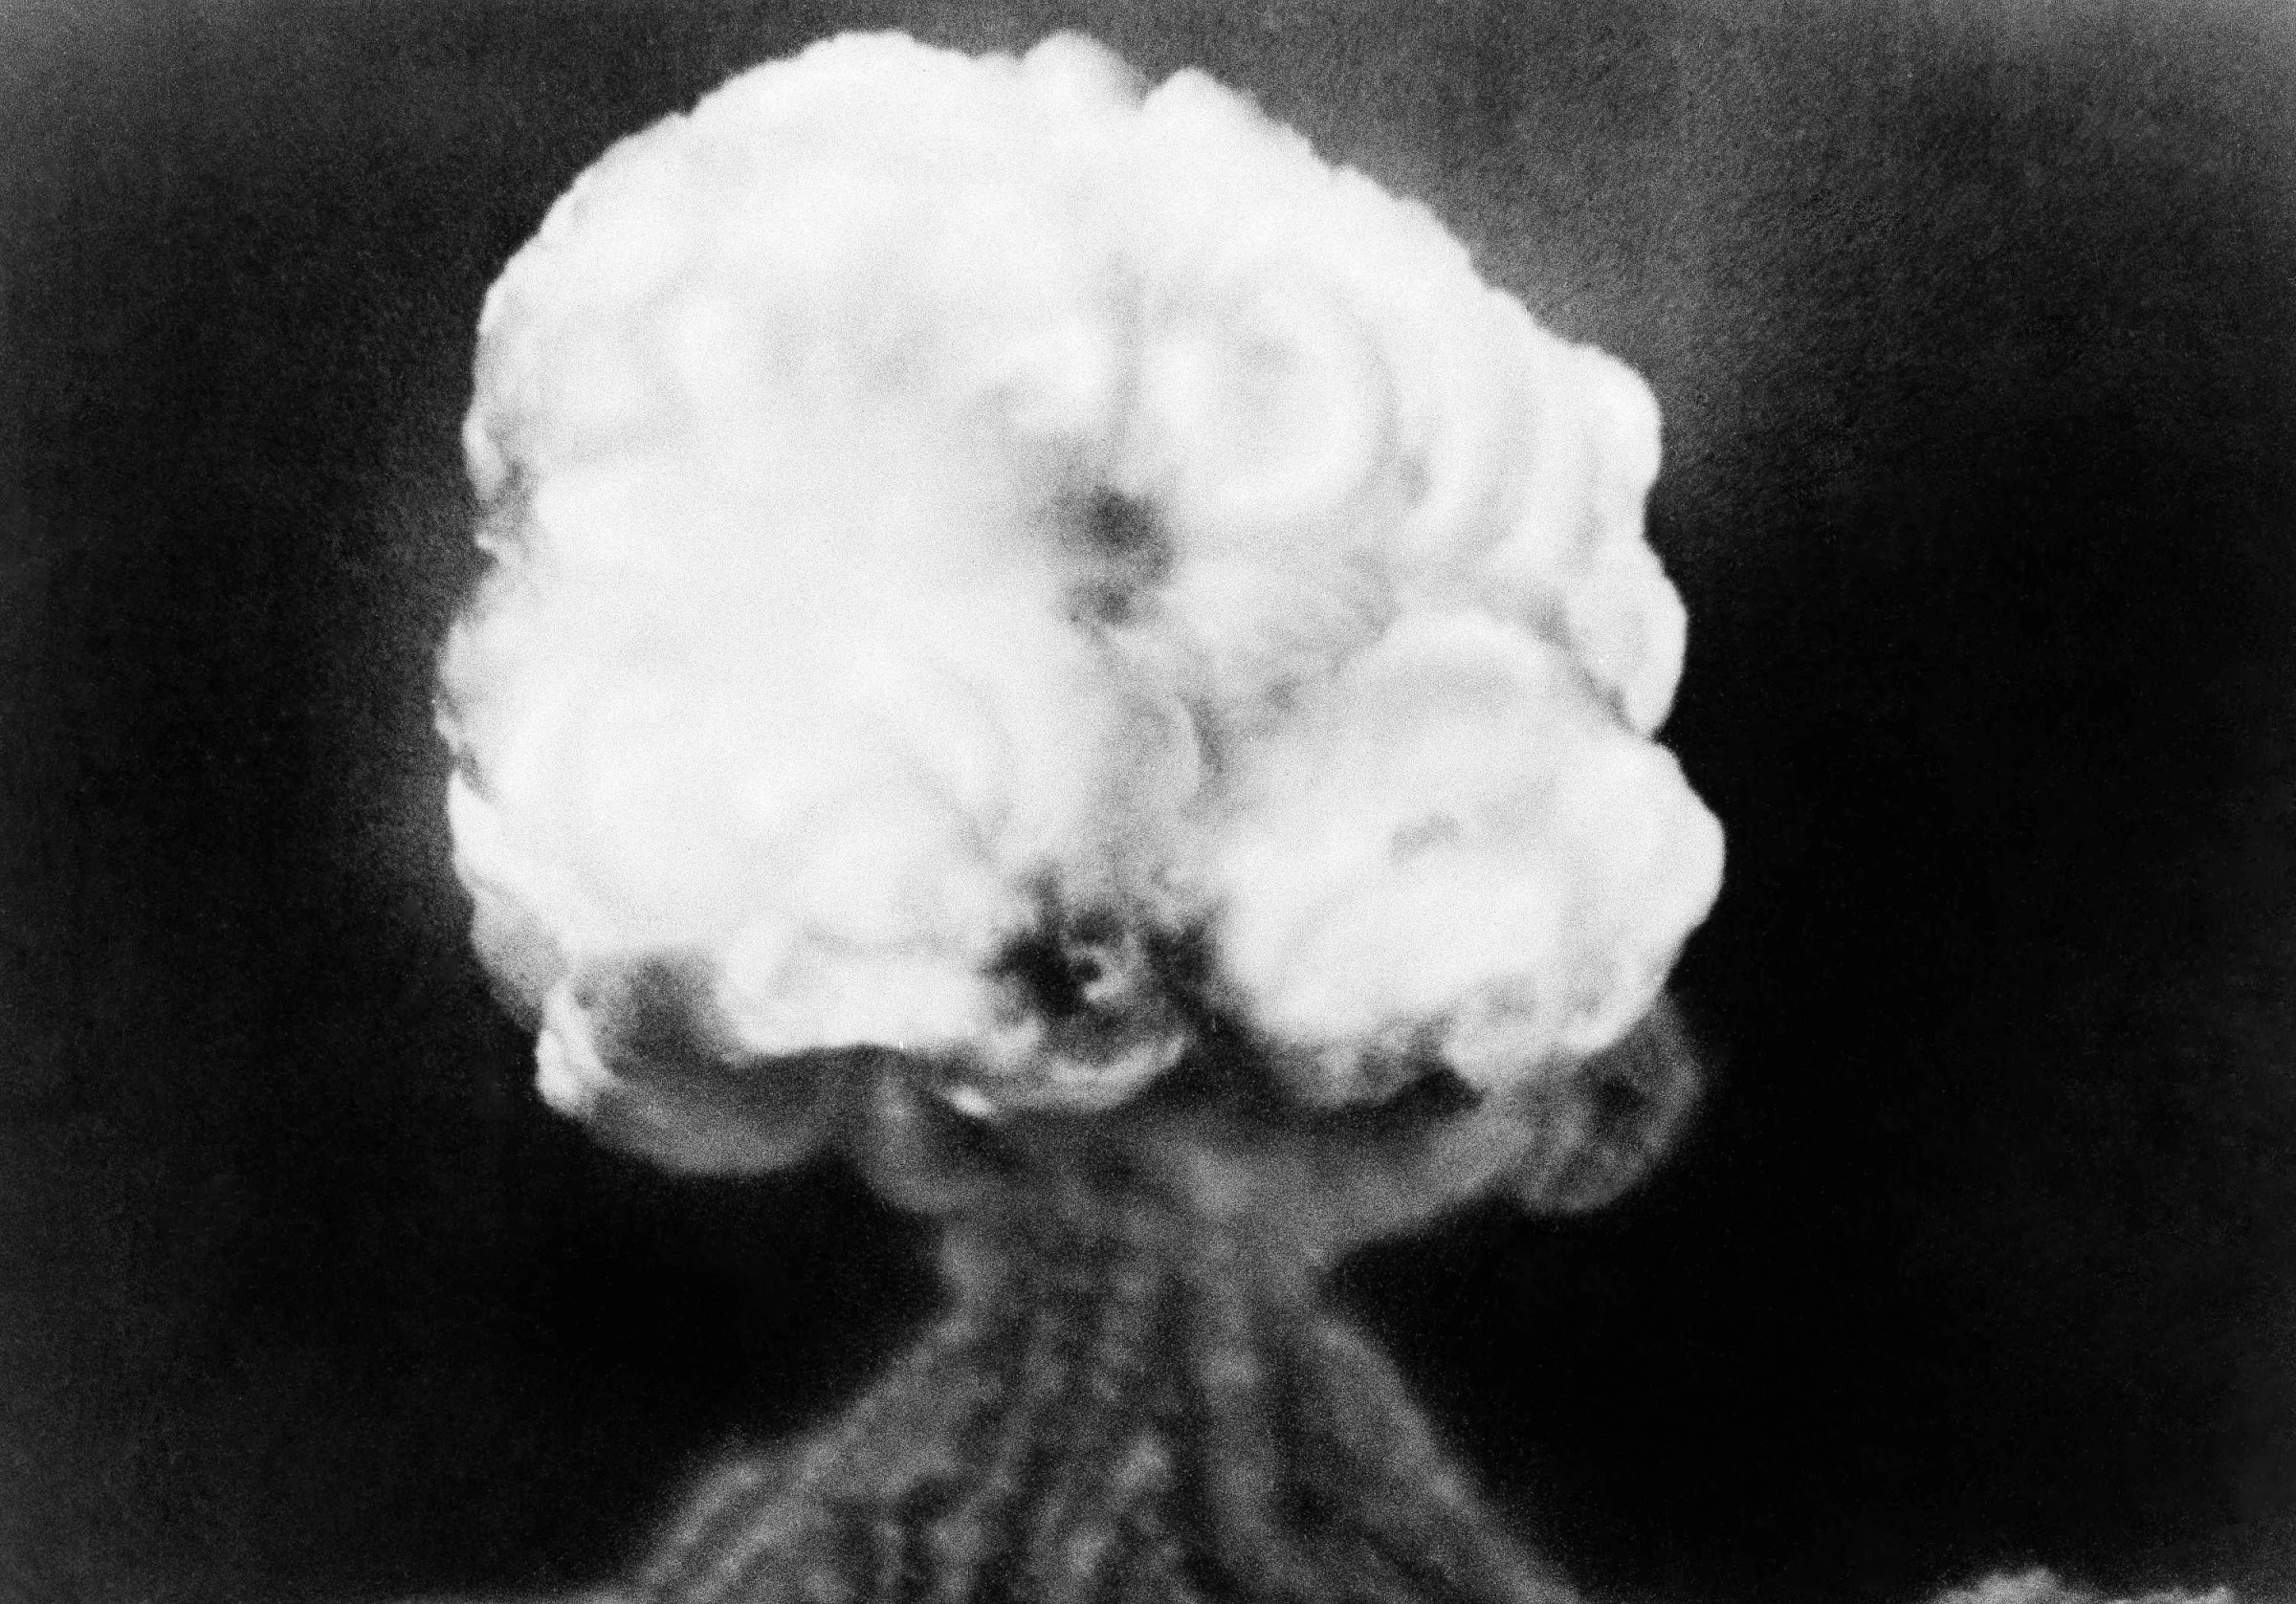 This is the mushroom cloud of the first atomic explosion at Trinity Test Site, New Mexico on July 16, 1945. It left a half-mile wide crater, ten feet deep at the vent and the sand within the crater had been burned and boiled into a highly radioactive, jade-green, glassy crust.